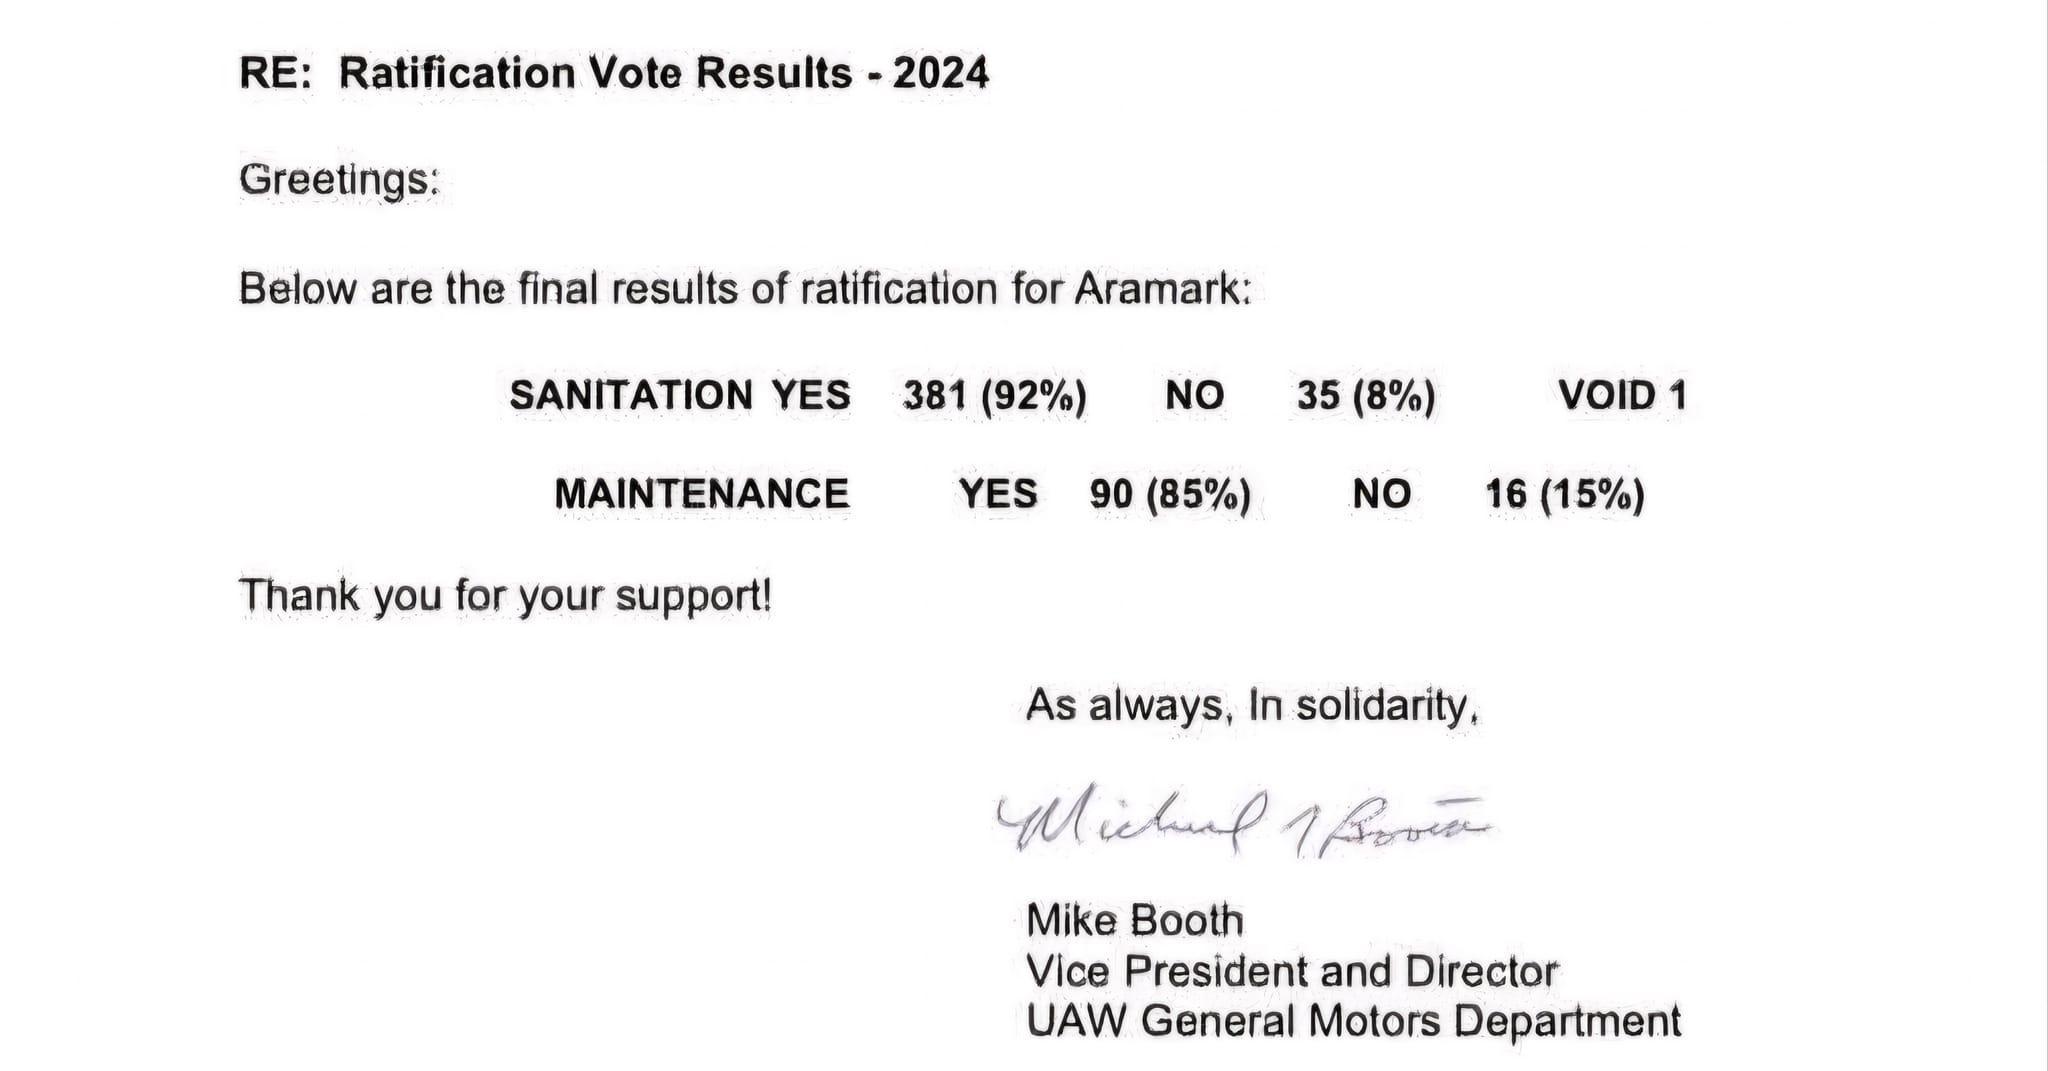 The 2024 Aramark contract has received ratification.